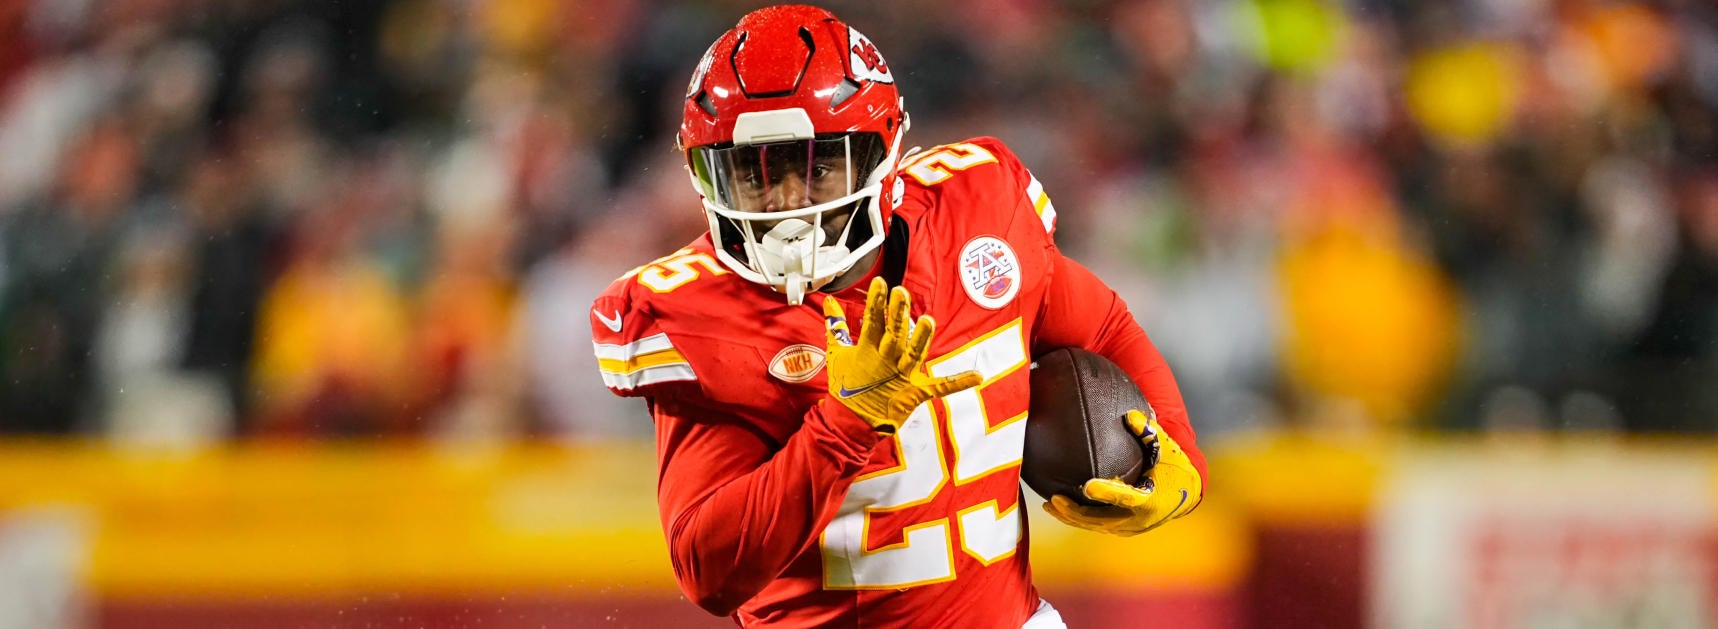 NFL Week 18 picks: Trusting Chiefs backups, and more against the spread best bets from Las Vegas contest expert